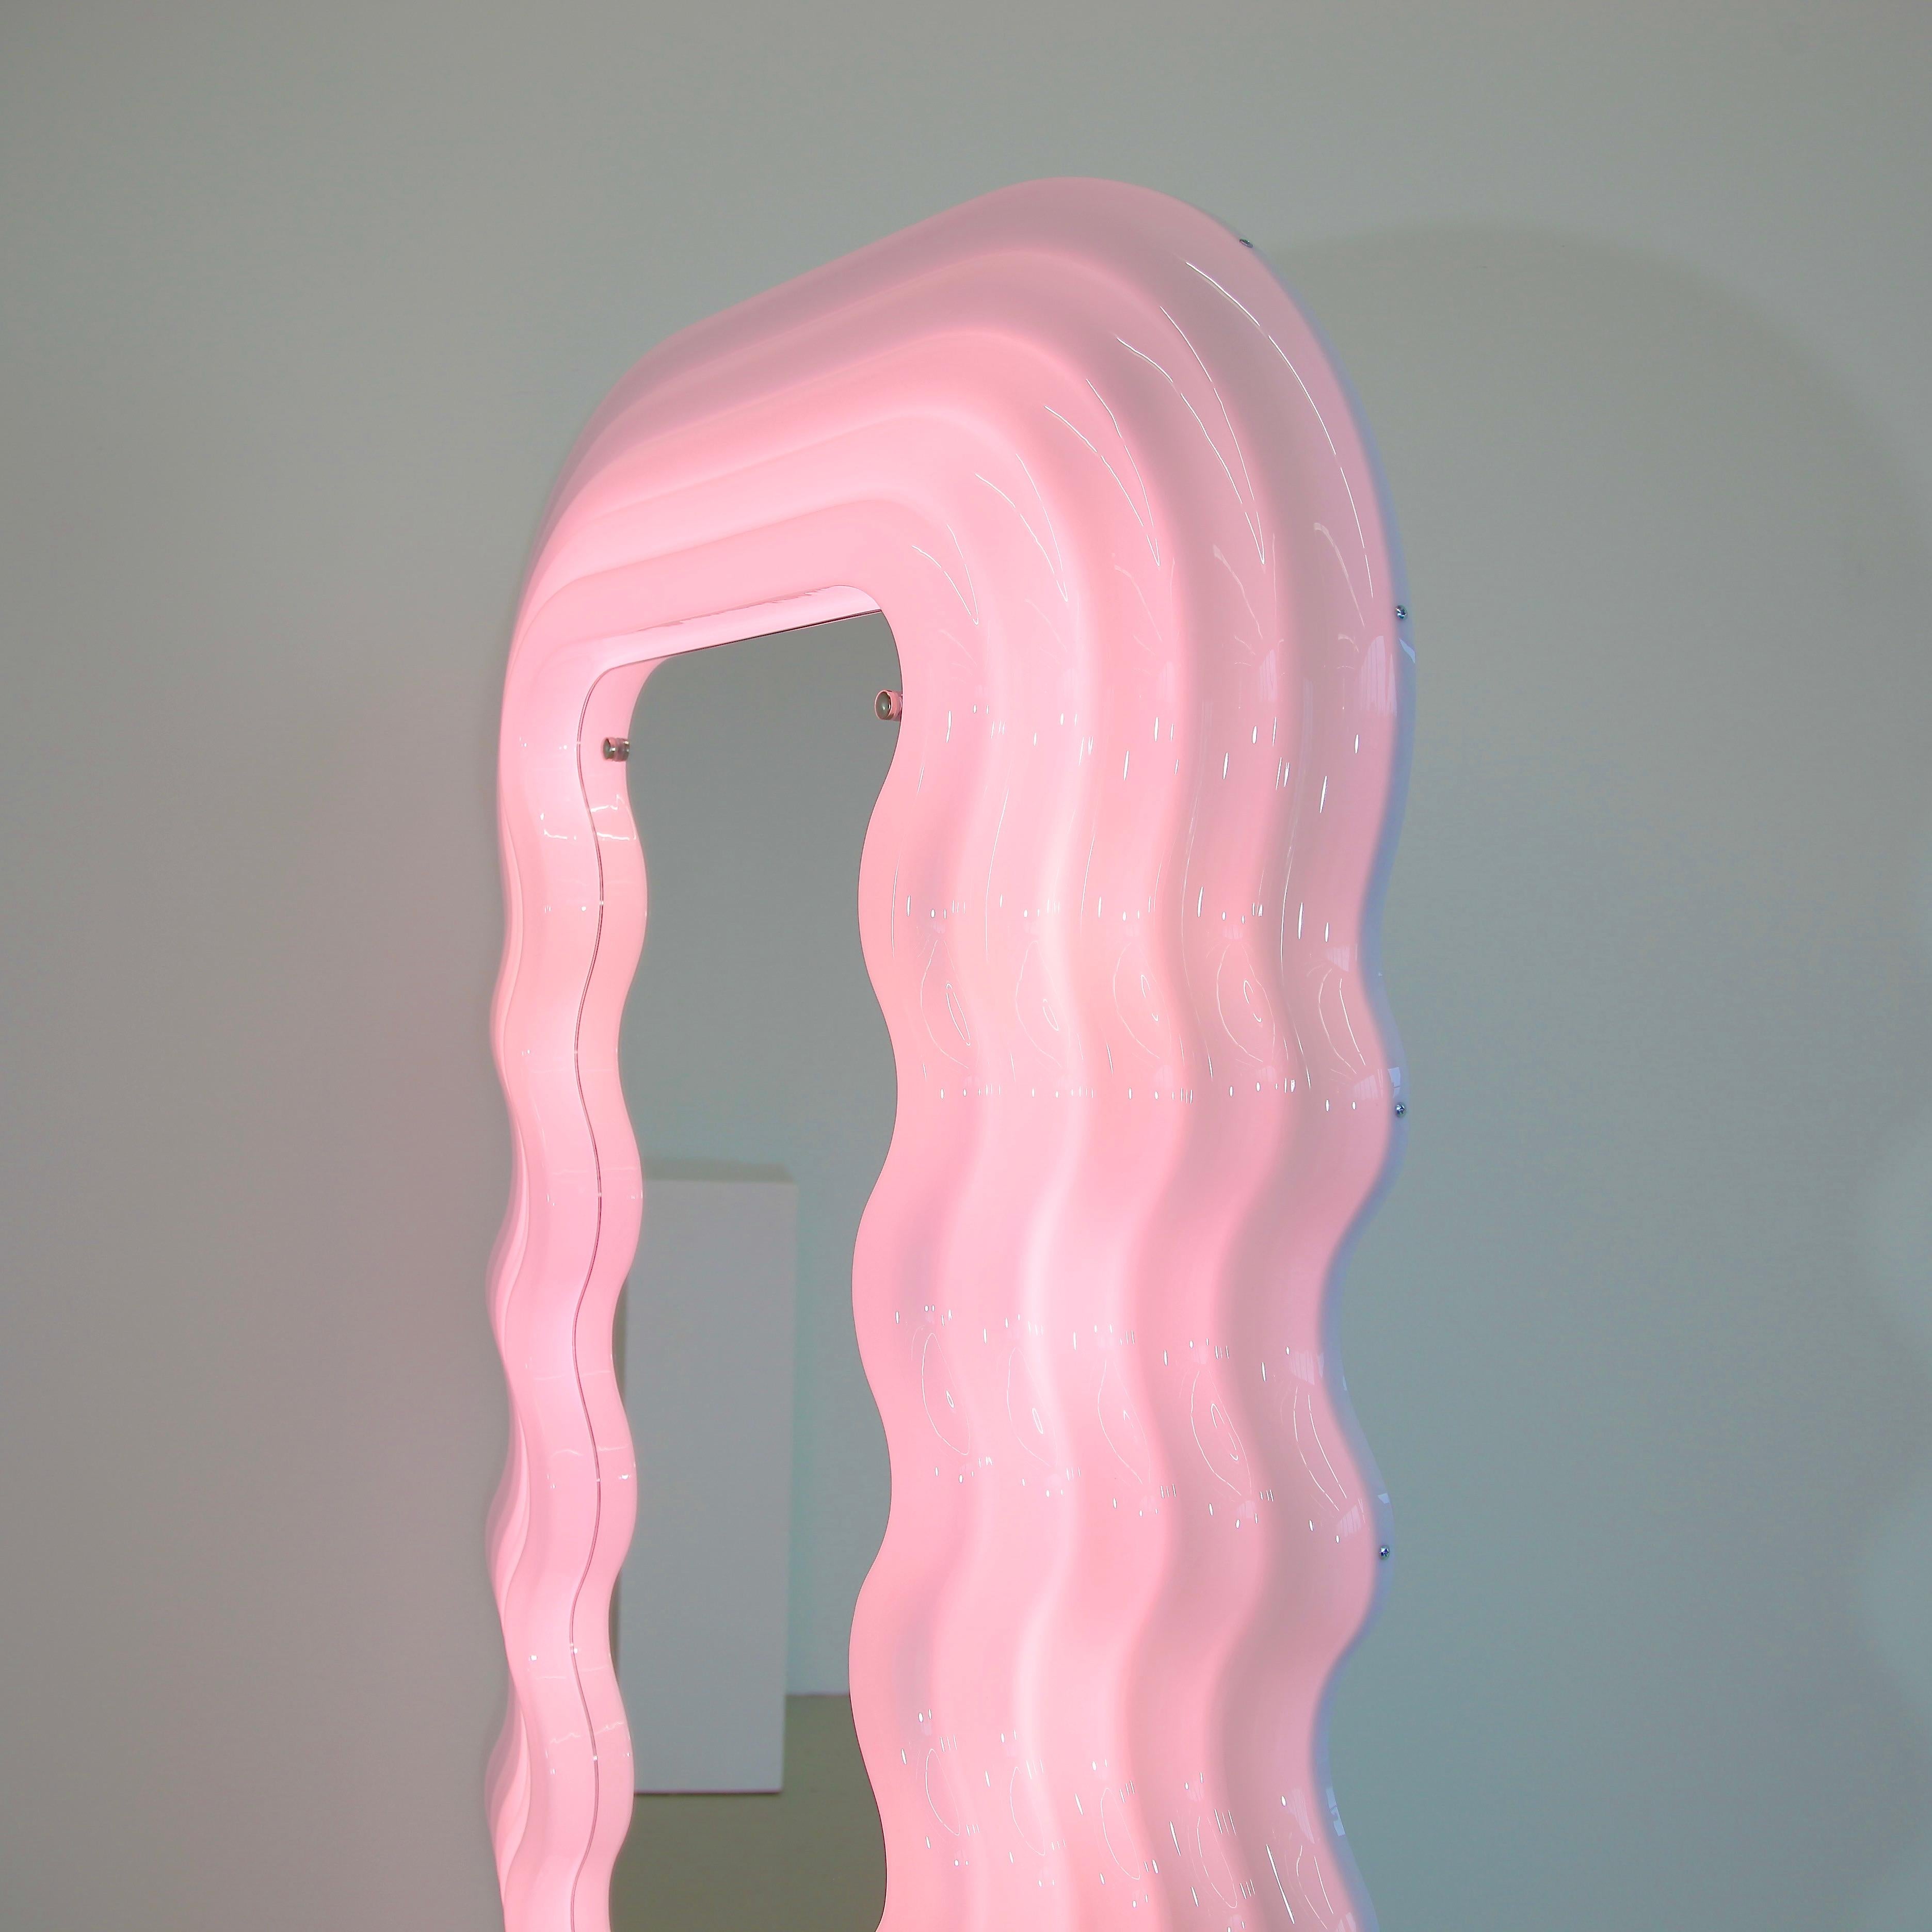 Ultrafragola mirror, designed by Ettore Sottsass, Italy, 1970.

Original recent production mirror made of moulded fibreglass with hard-back and shaped mirror. The frame is white, turning pink when the light is switched on. Original Makers Label on